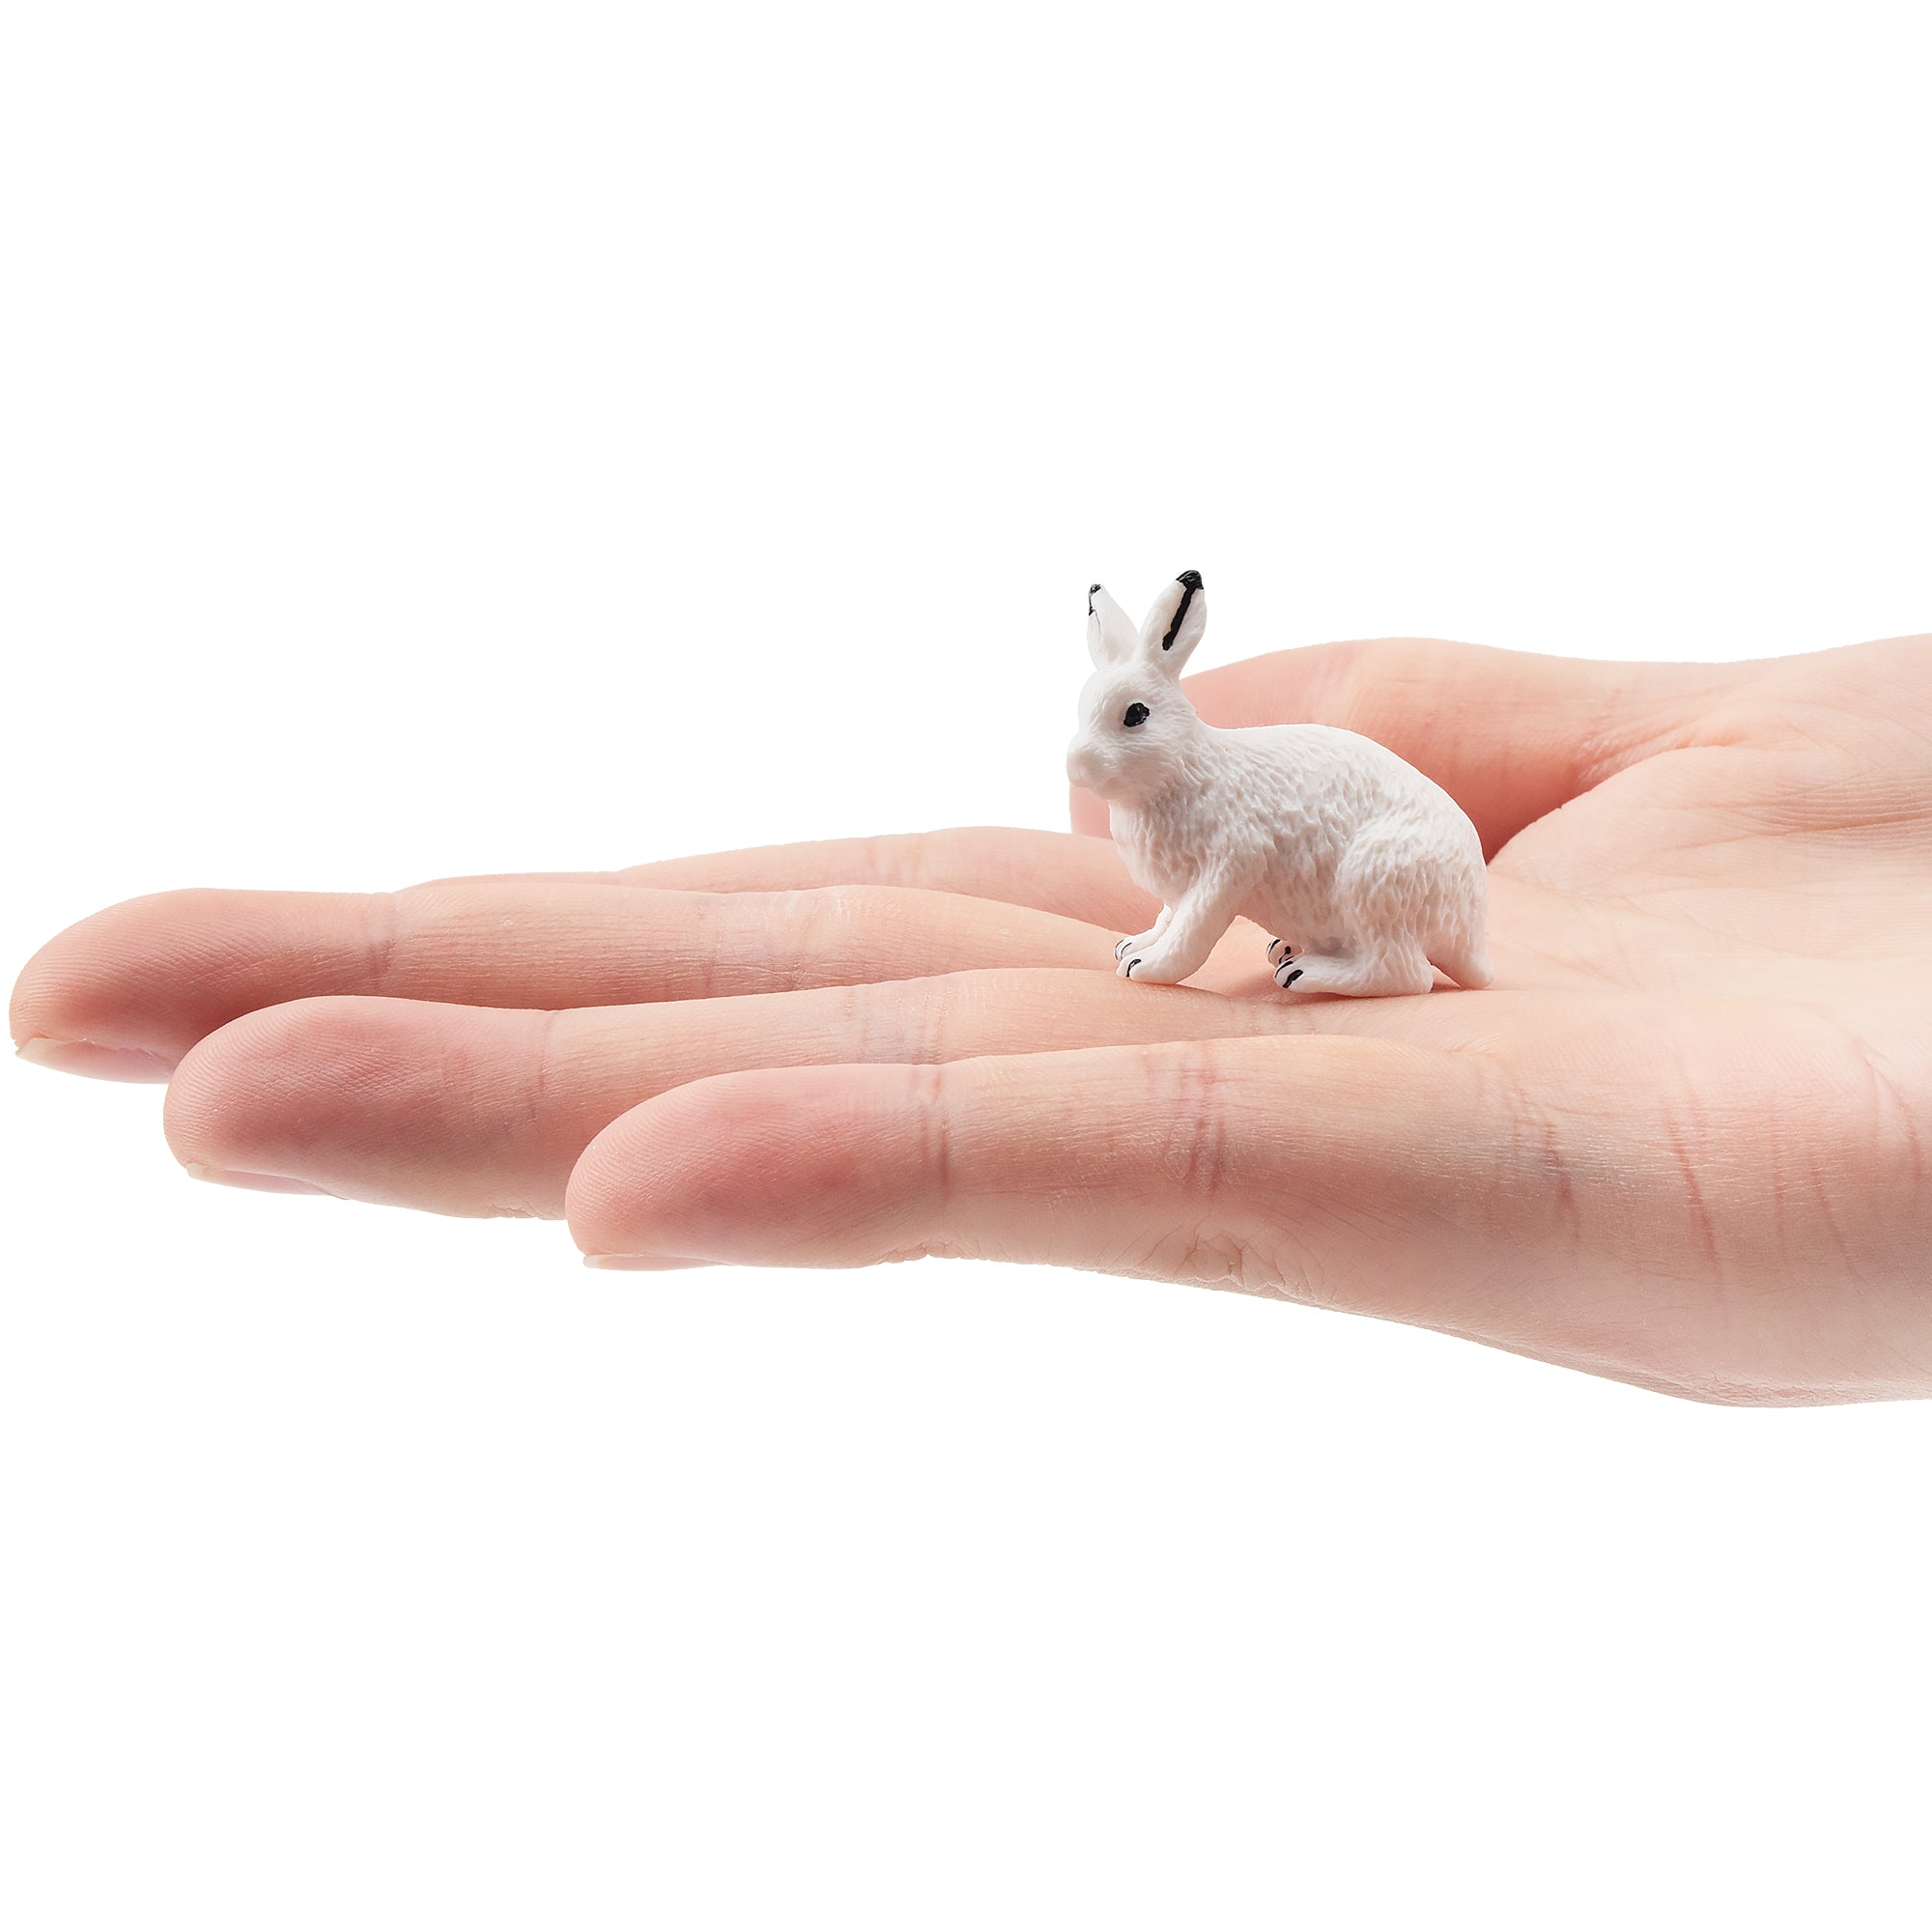 Toymany Arctic Hare Figurine Toy-on hand